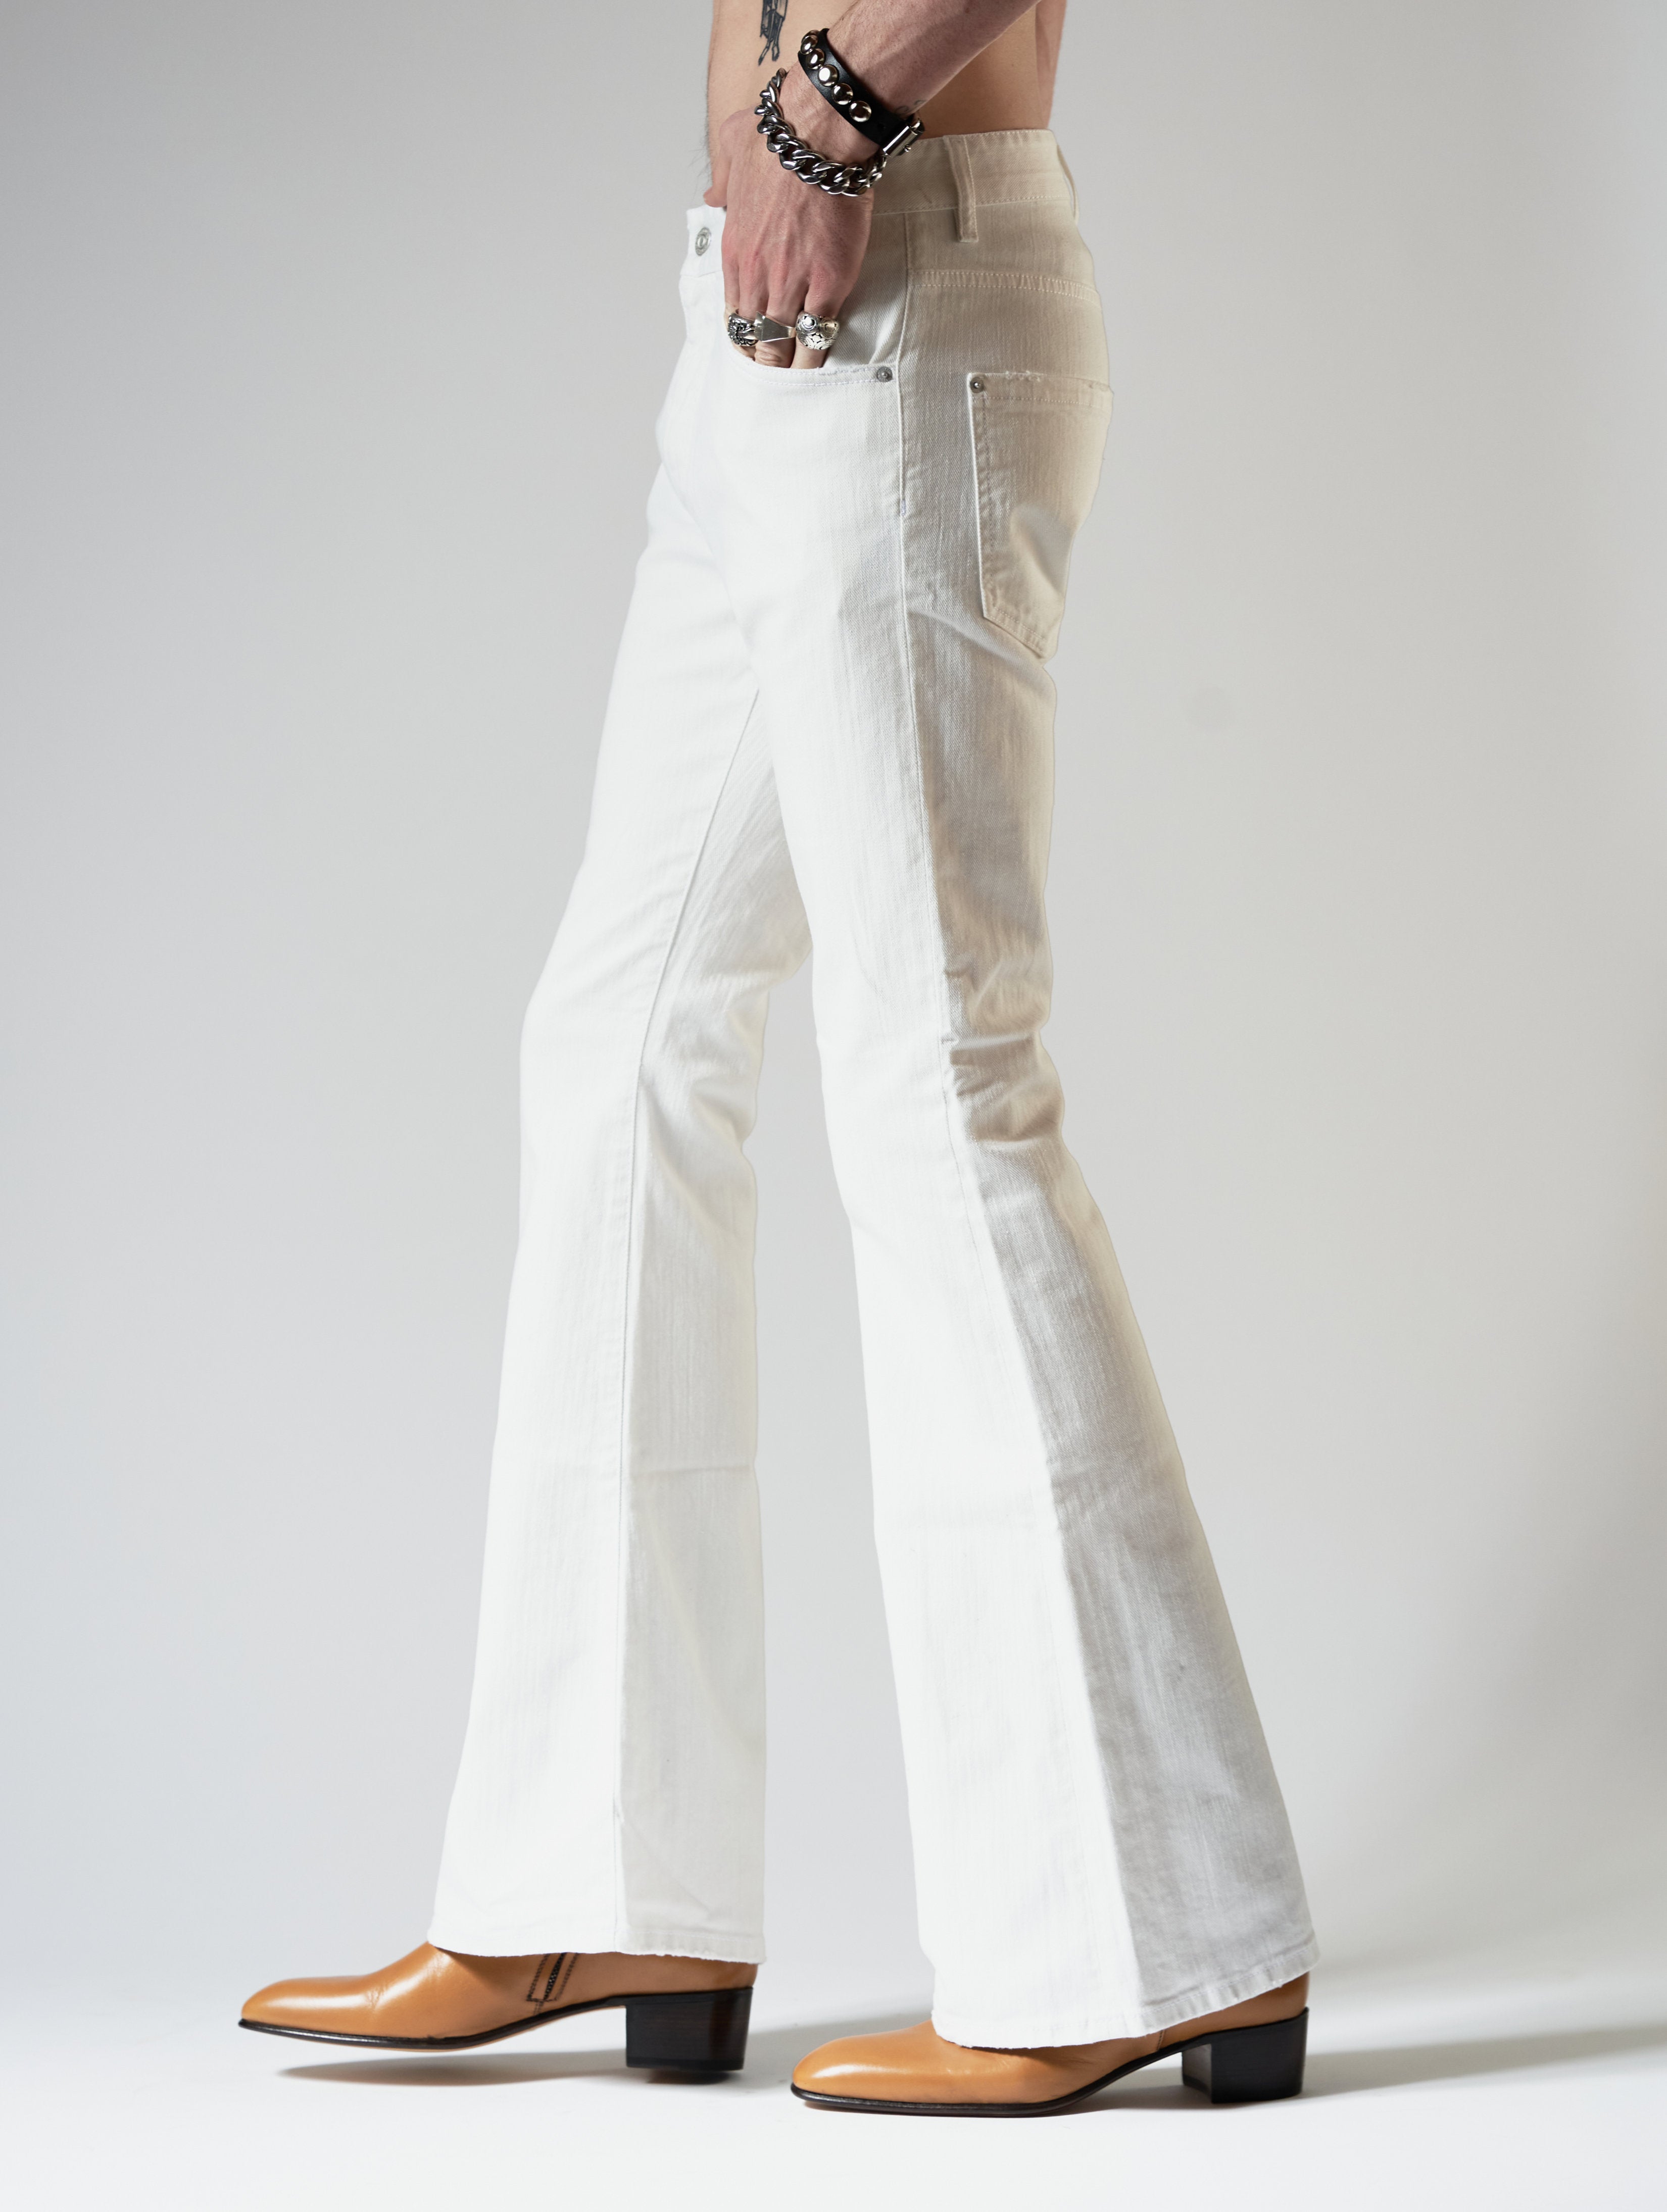 Buy Red And White Floral High Waist Bell Bottom Pants Online